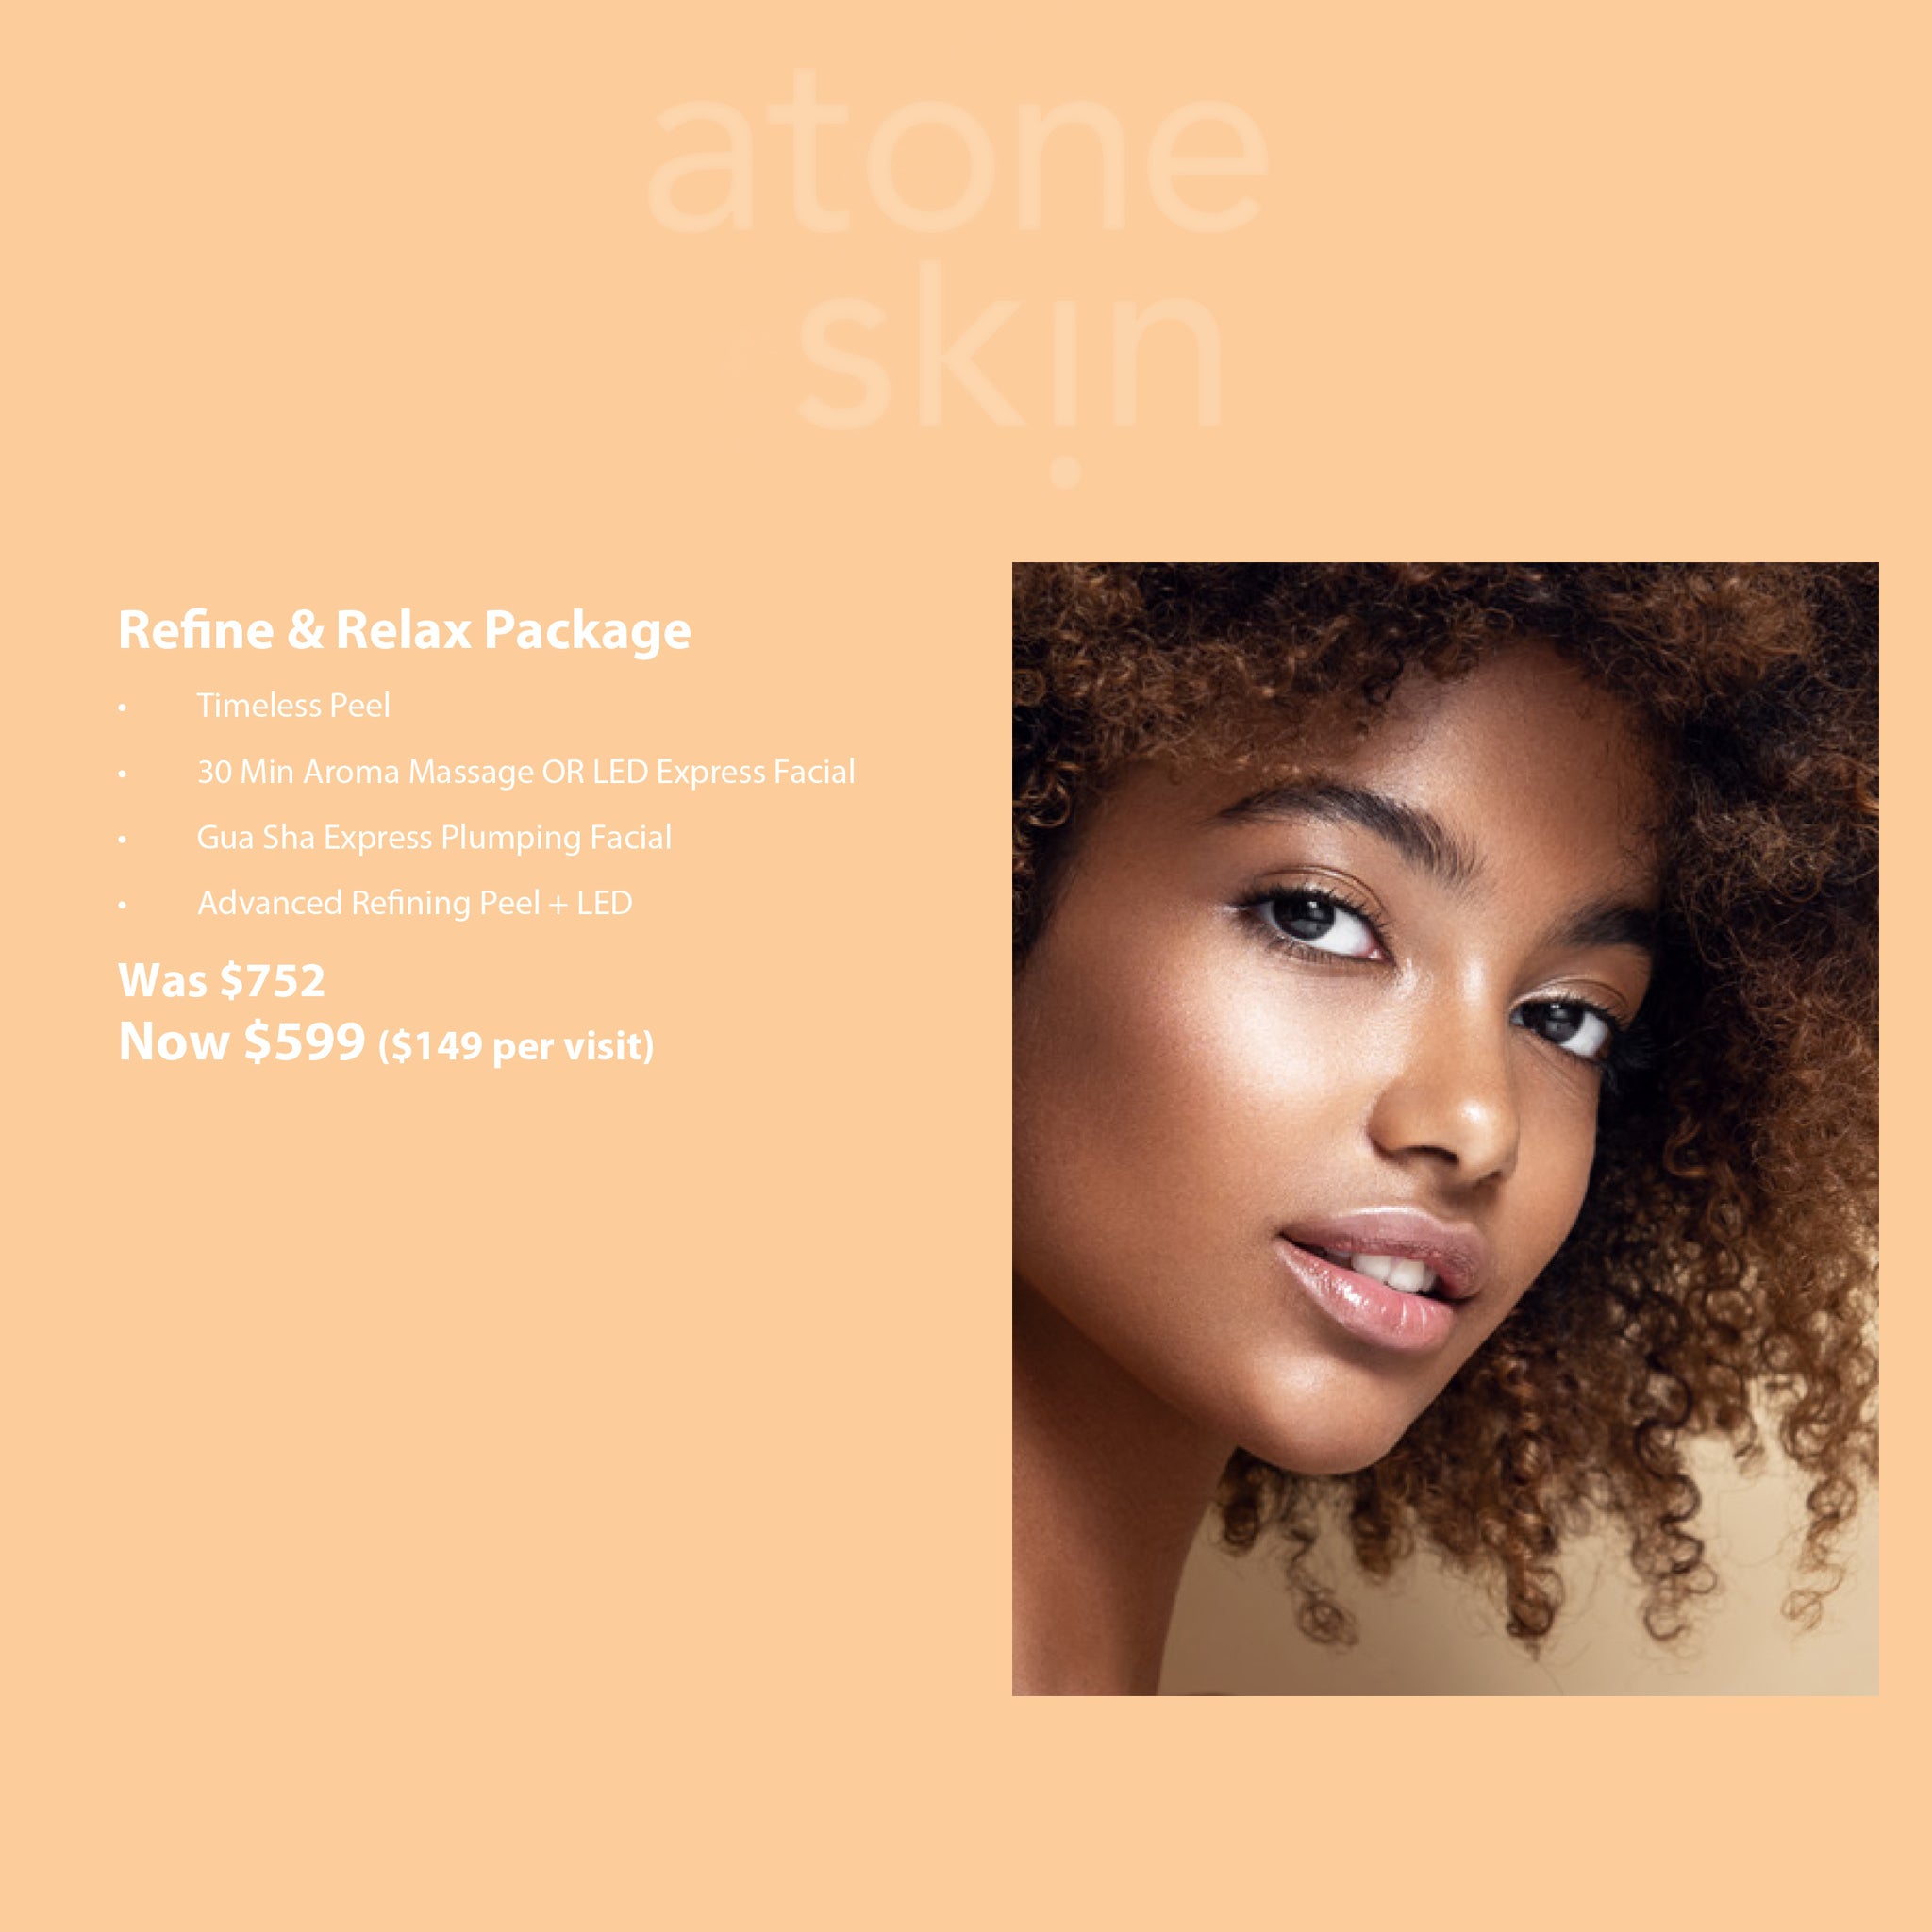 Refine & Relax Package